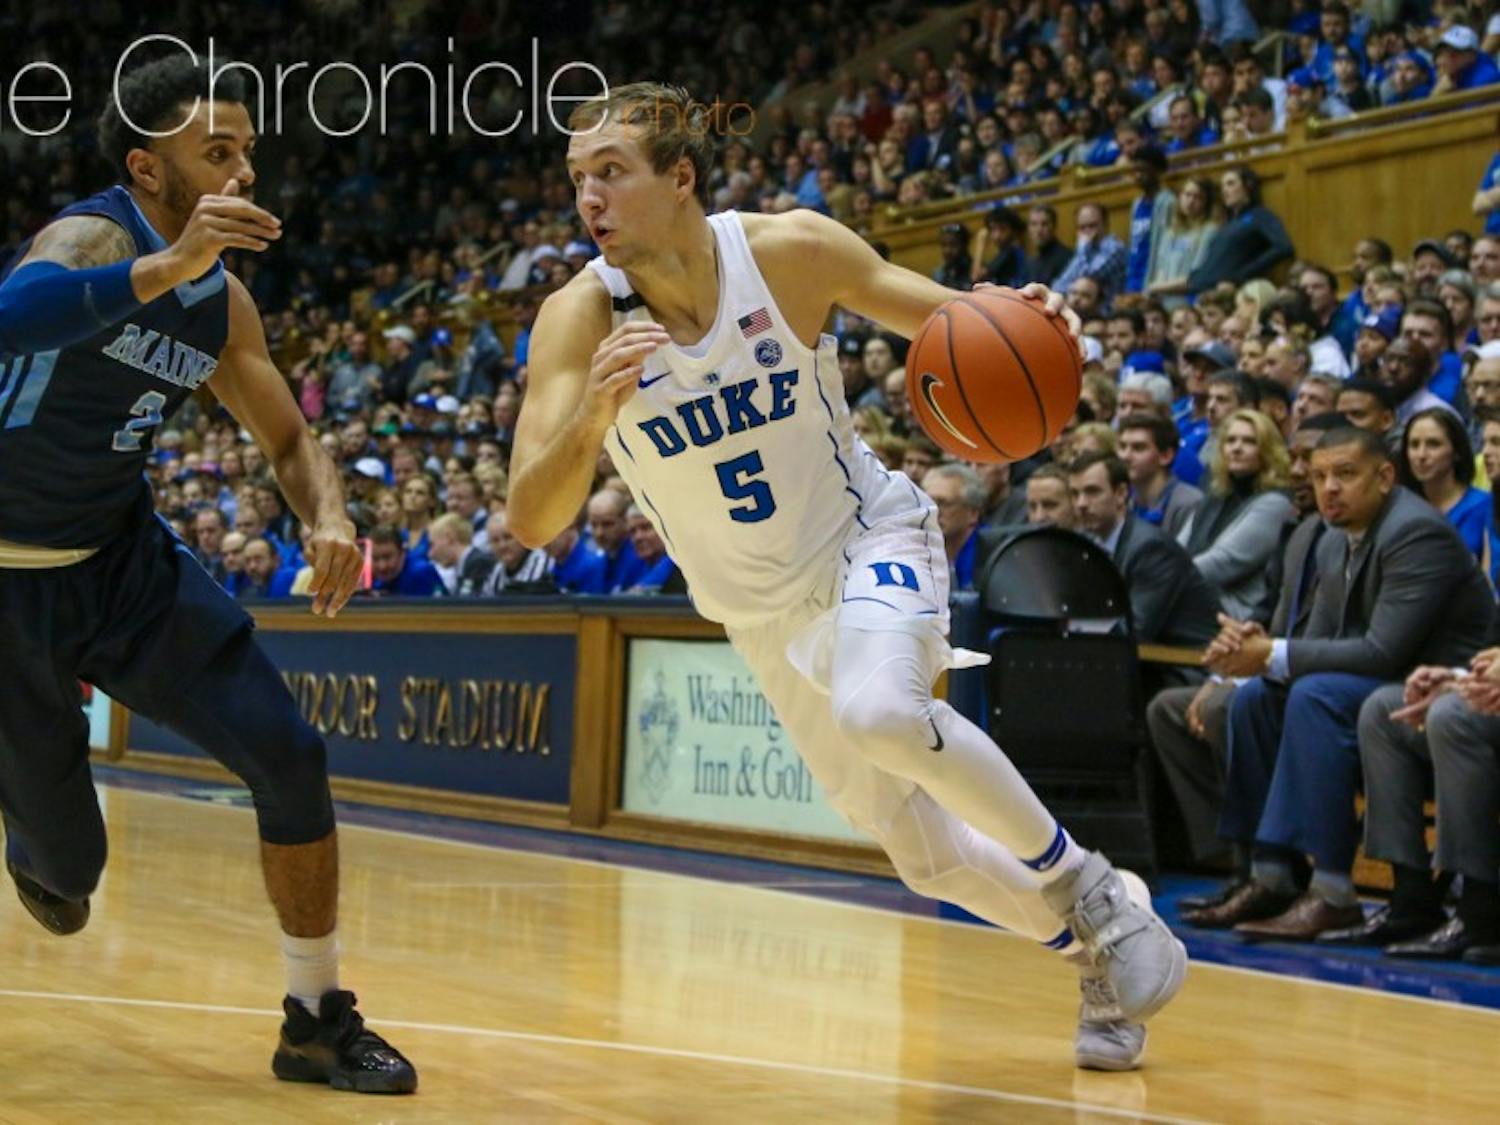 Luke Kennard poured in a career-high 35 points on just 16 shots from the field Saturday.